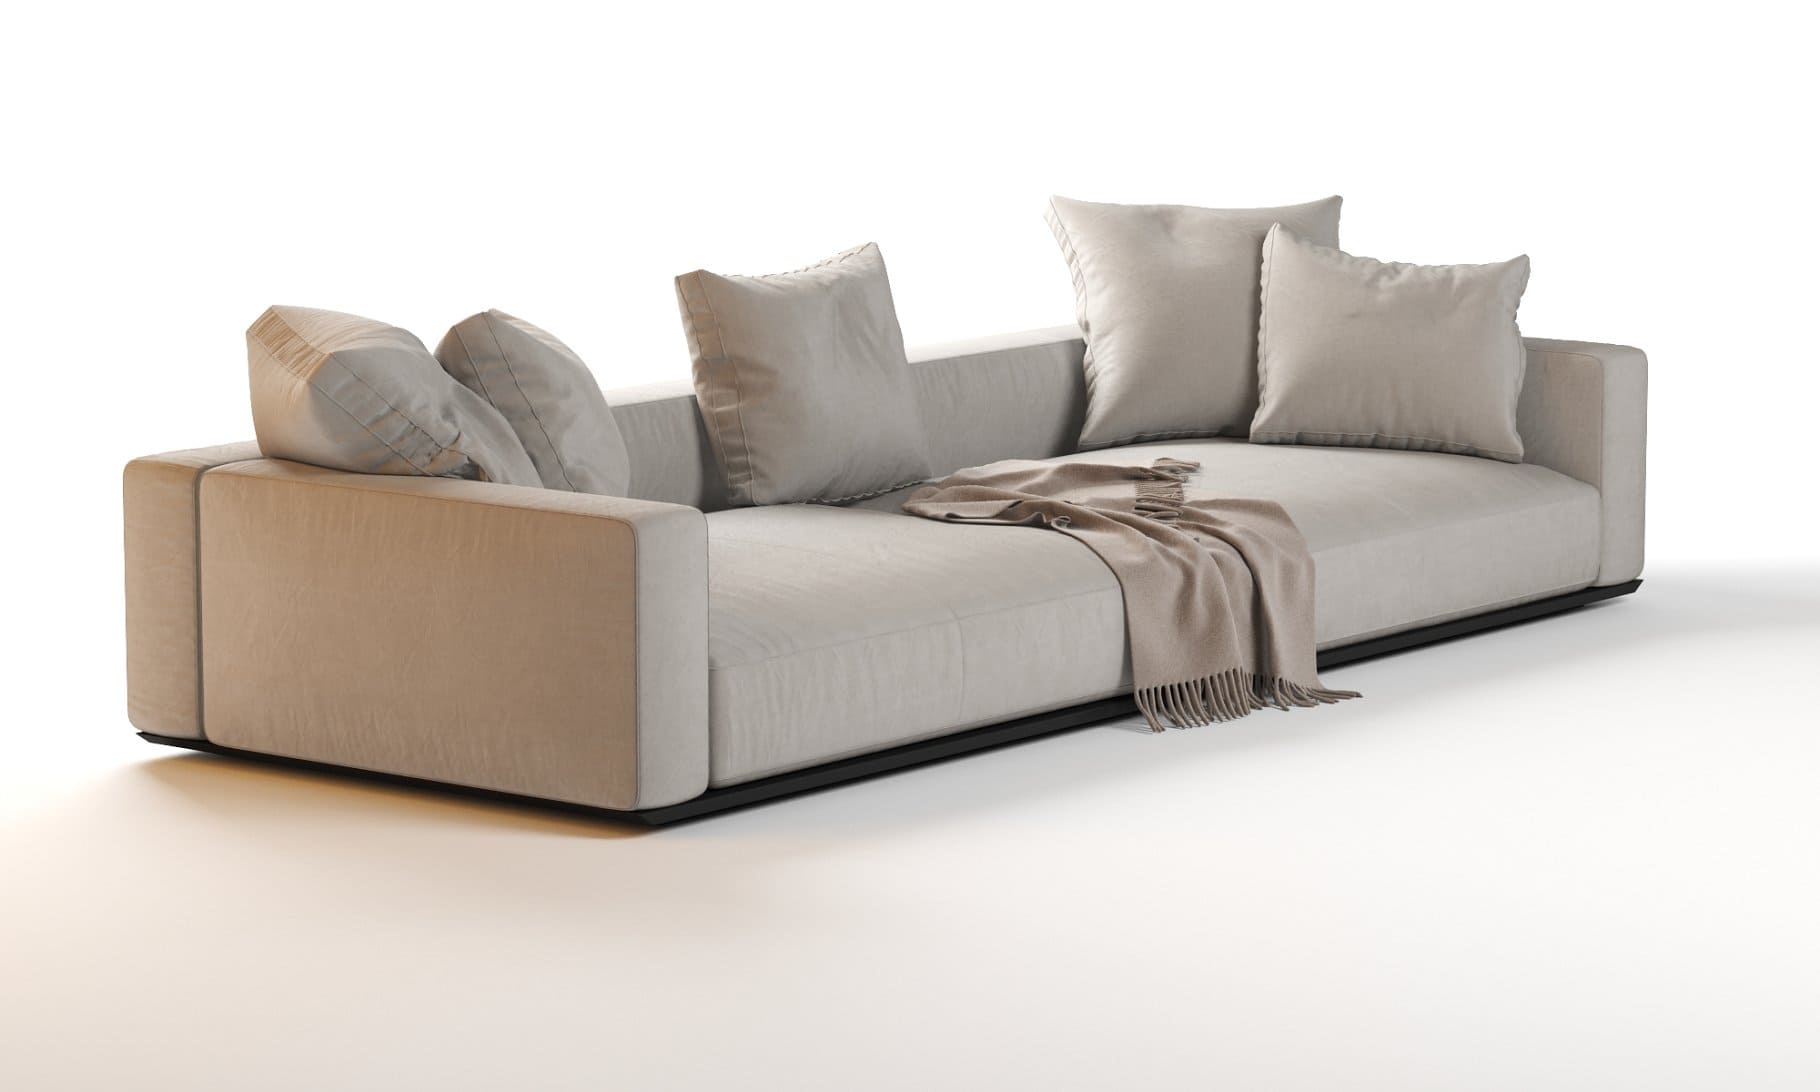 Image of the Flexform Grandemare Sectional Sofa from the left side.